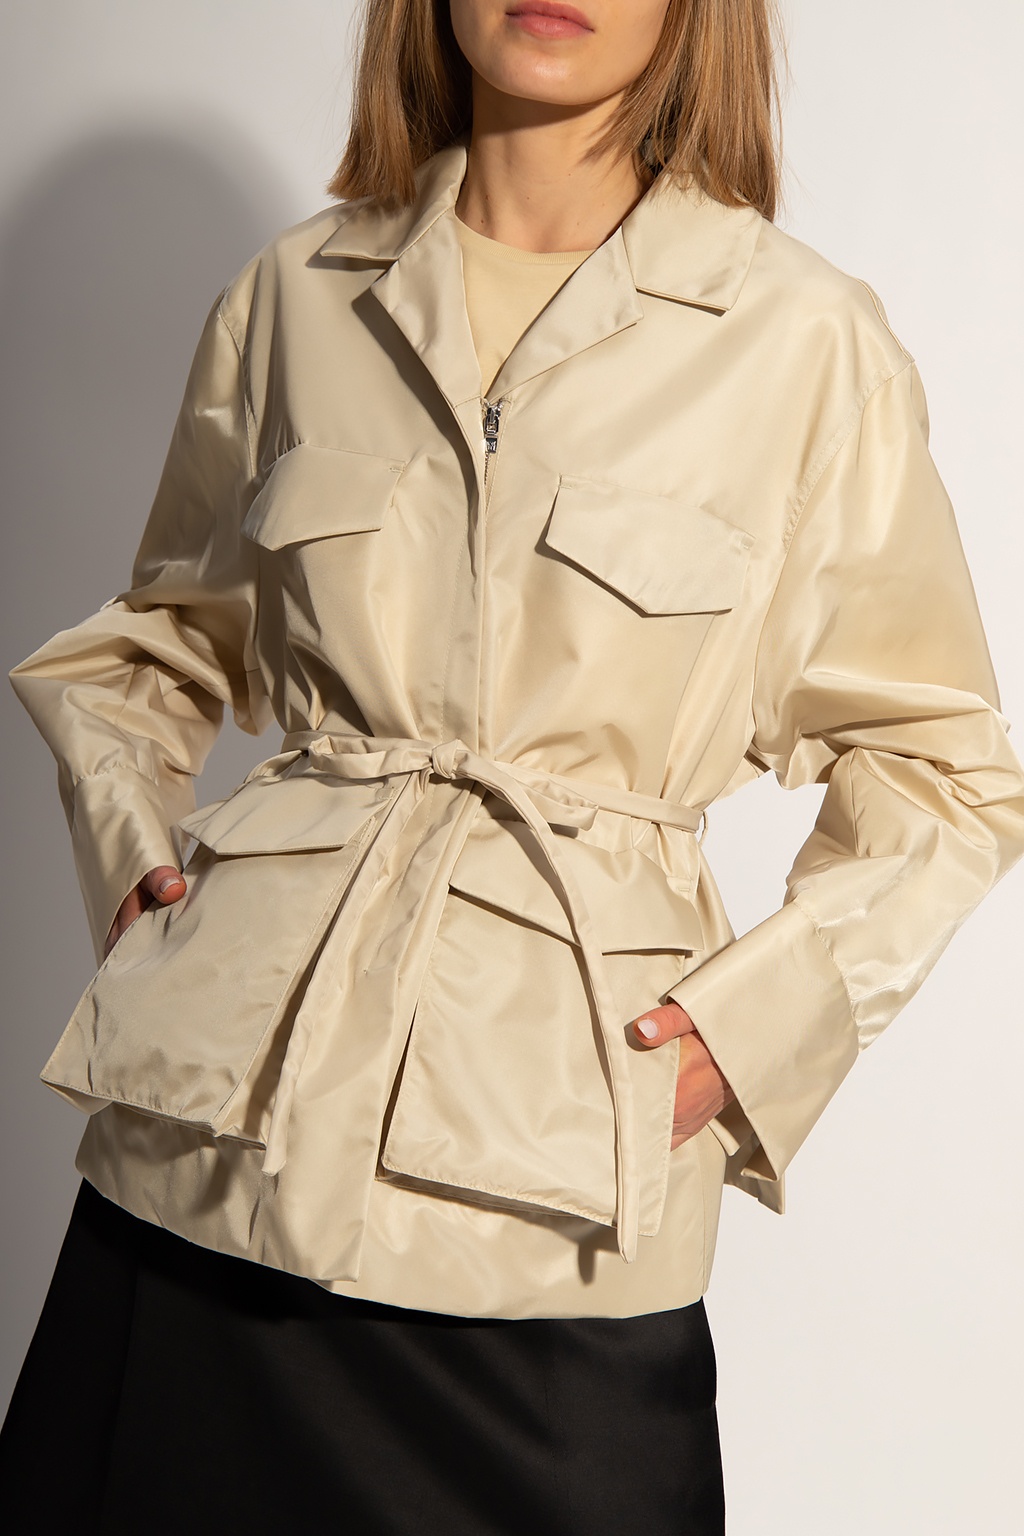 Toteme Jacket with notched lapels